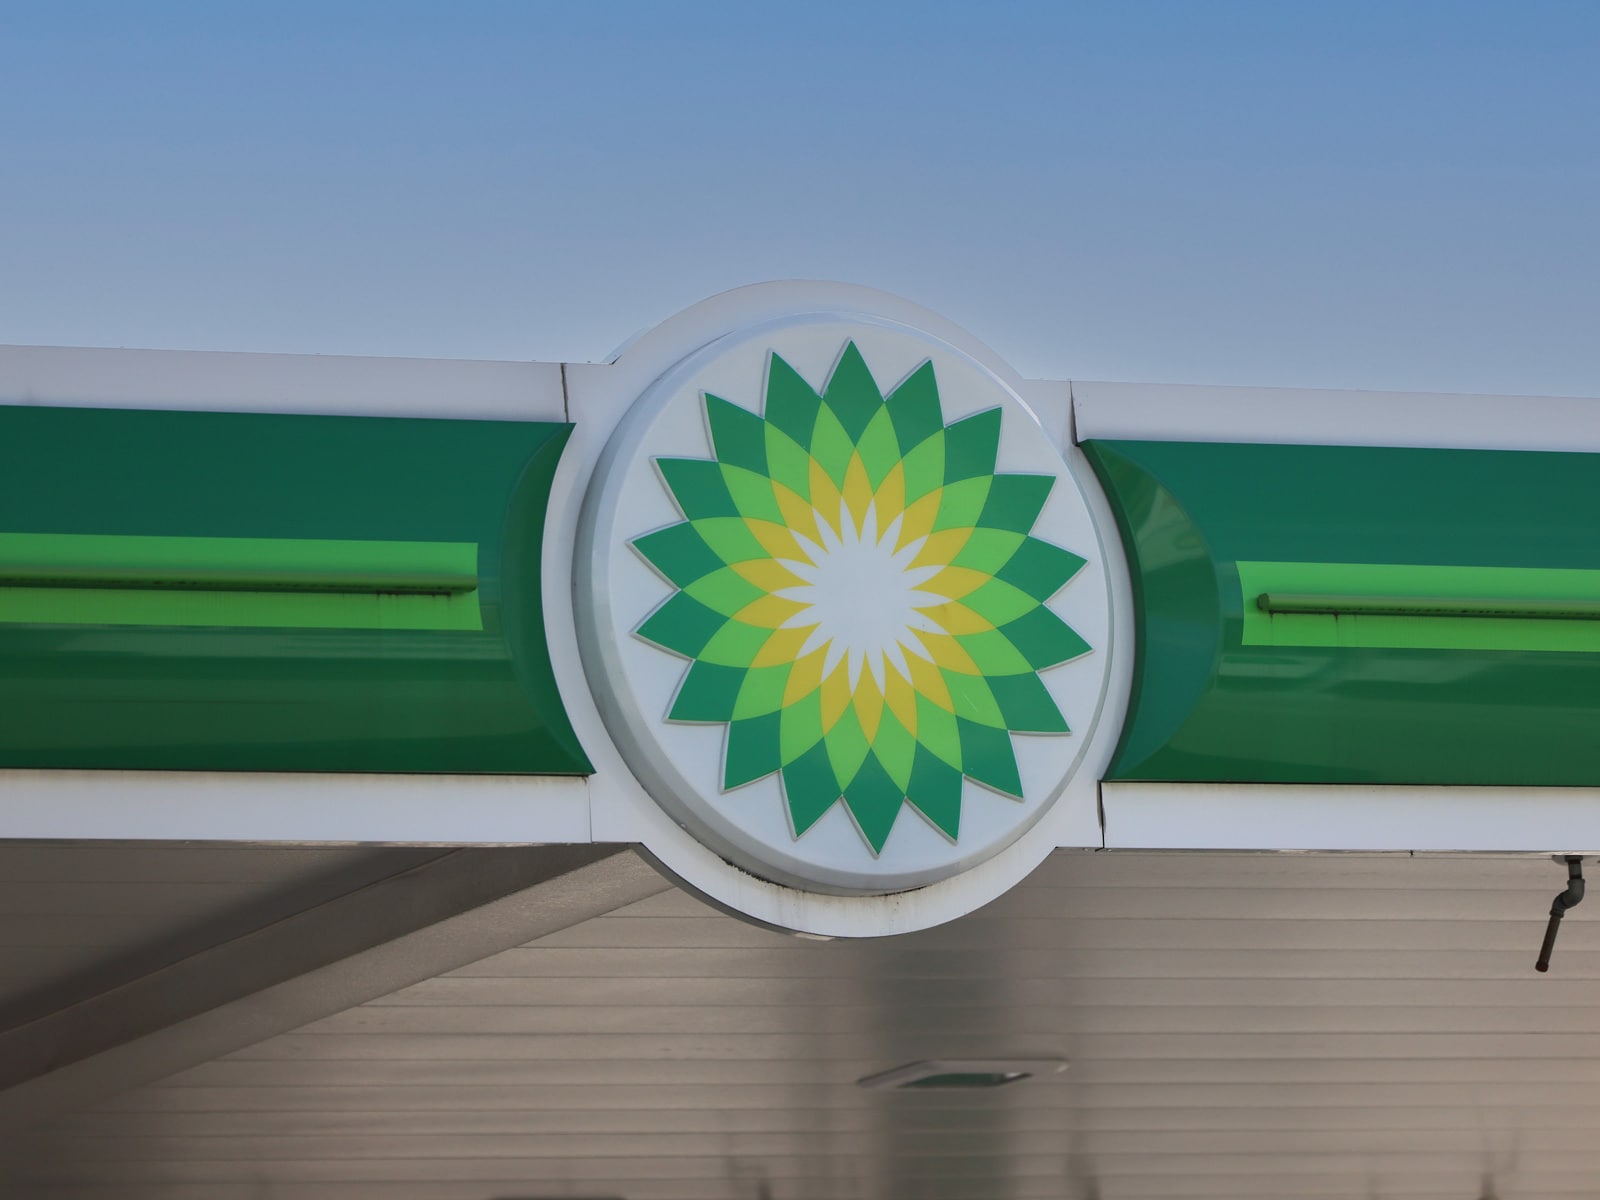 The BP logo appears above a petrol station forecourt.